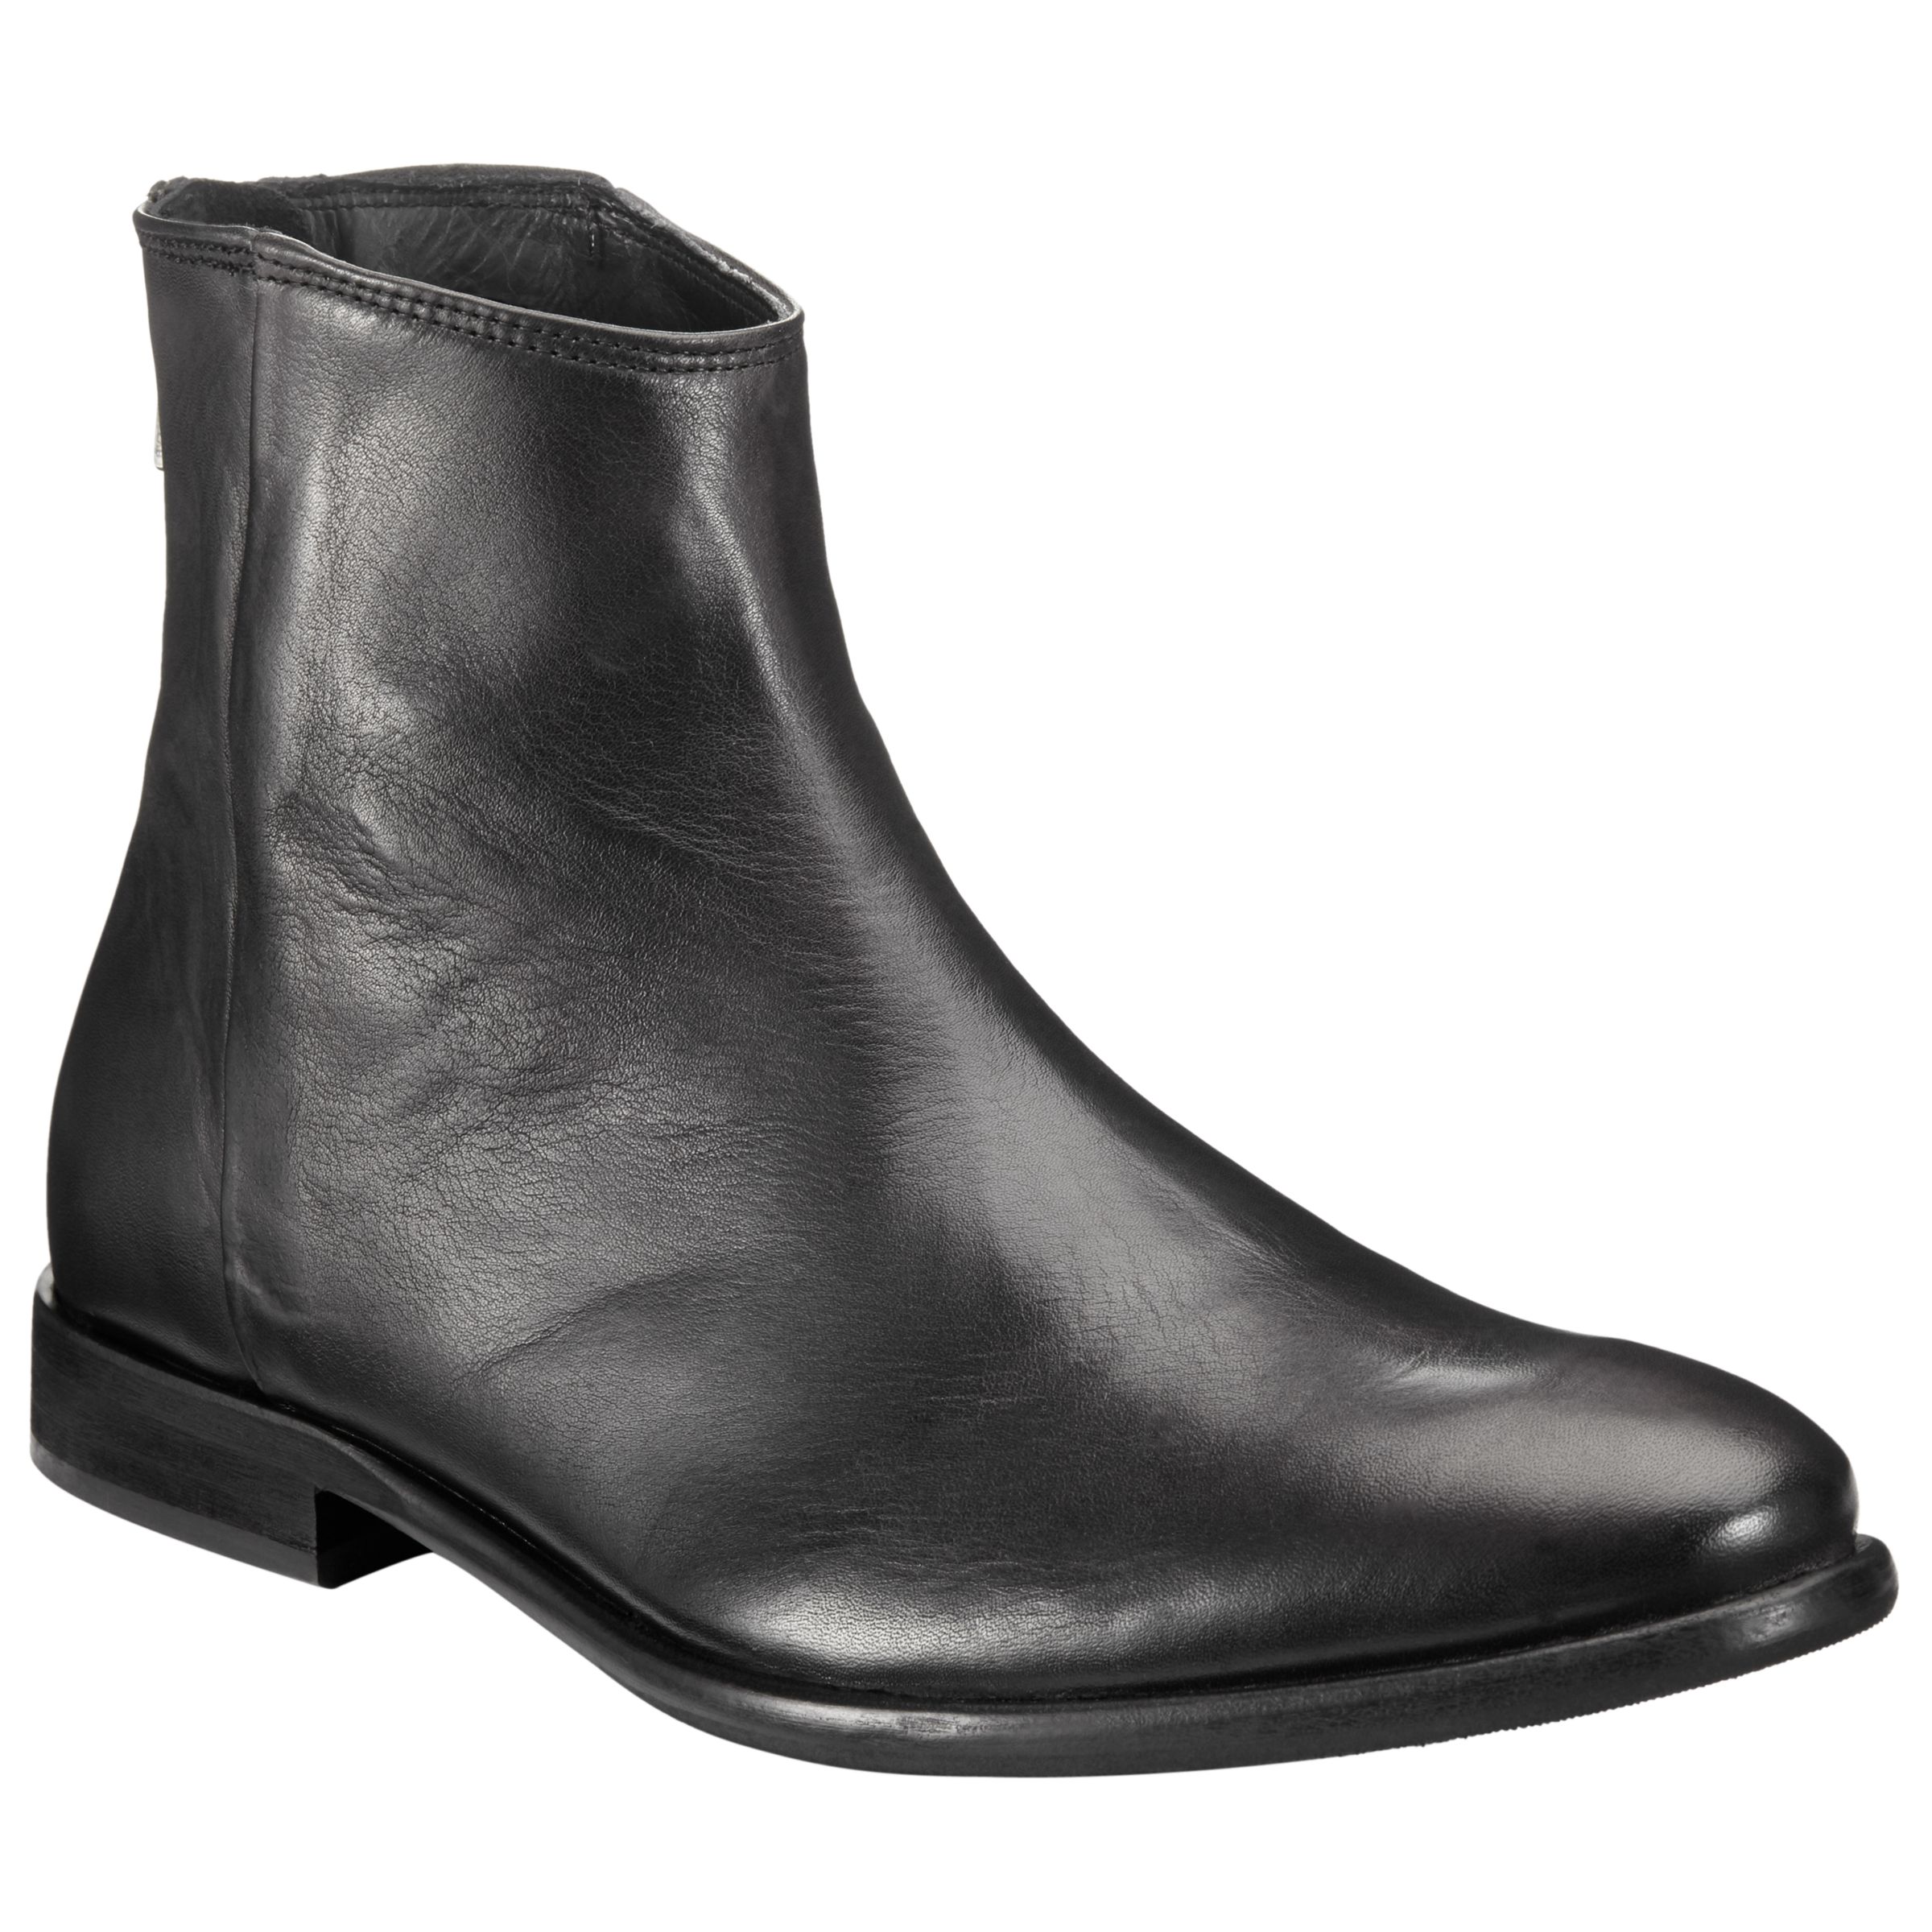 paul smith black boots